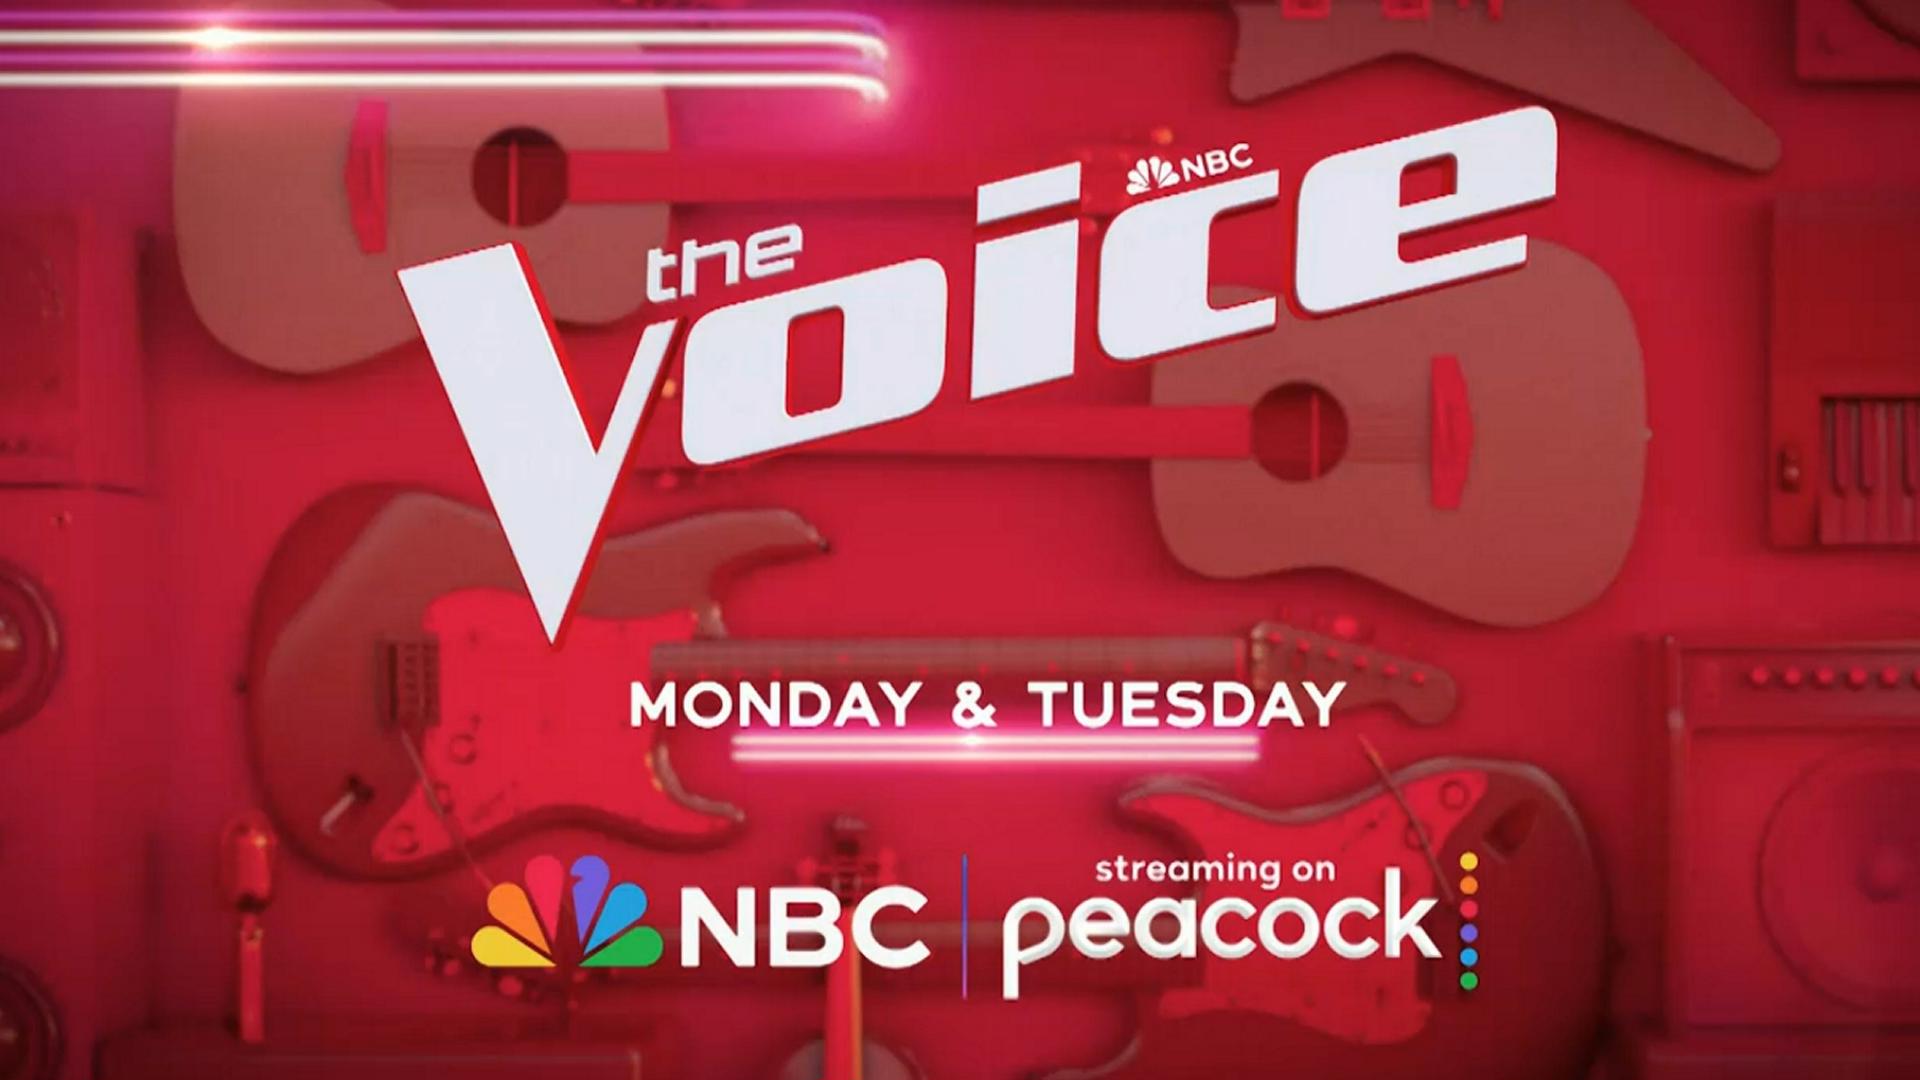 Watch Odessa native Marcos Covos on The Voice on Mondays and Tuesdays.